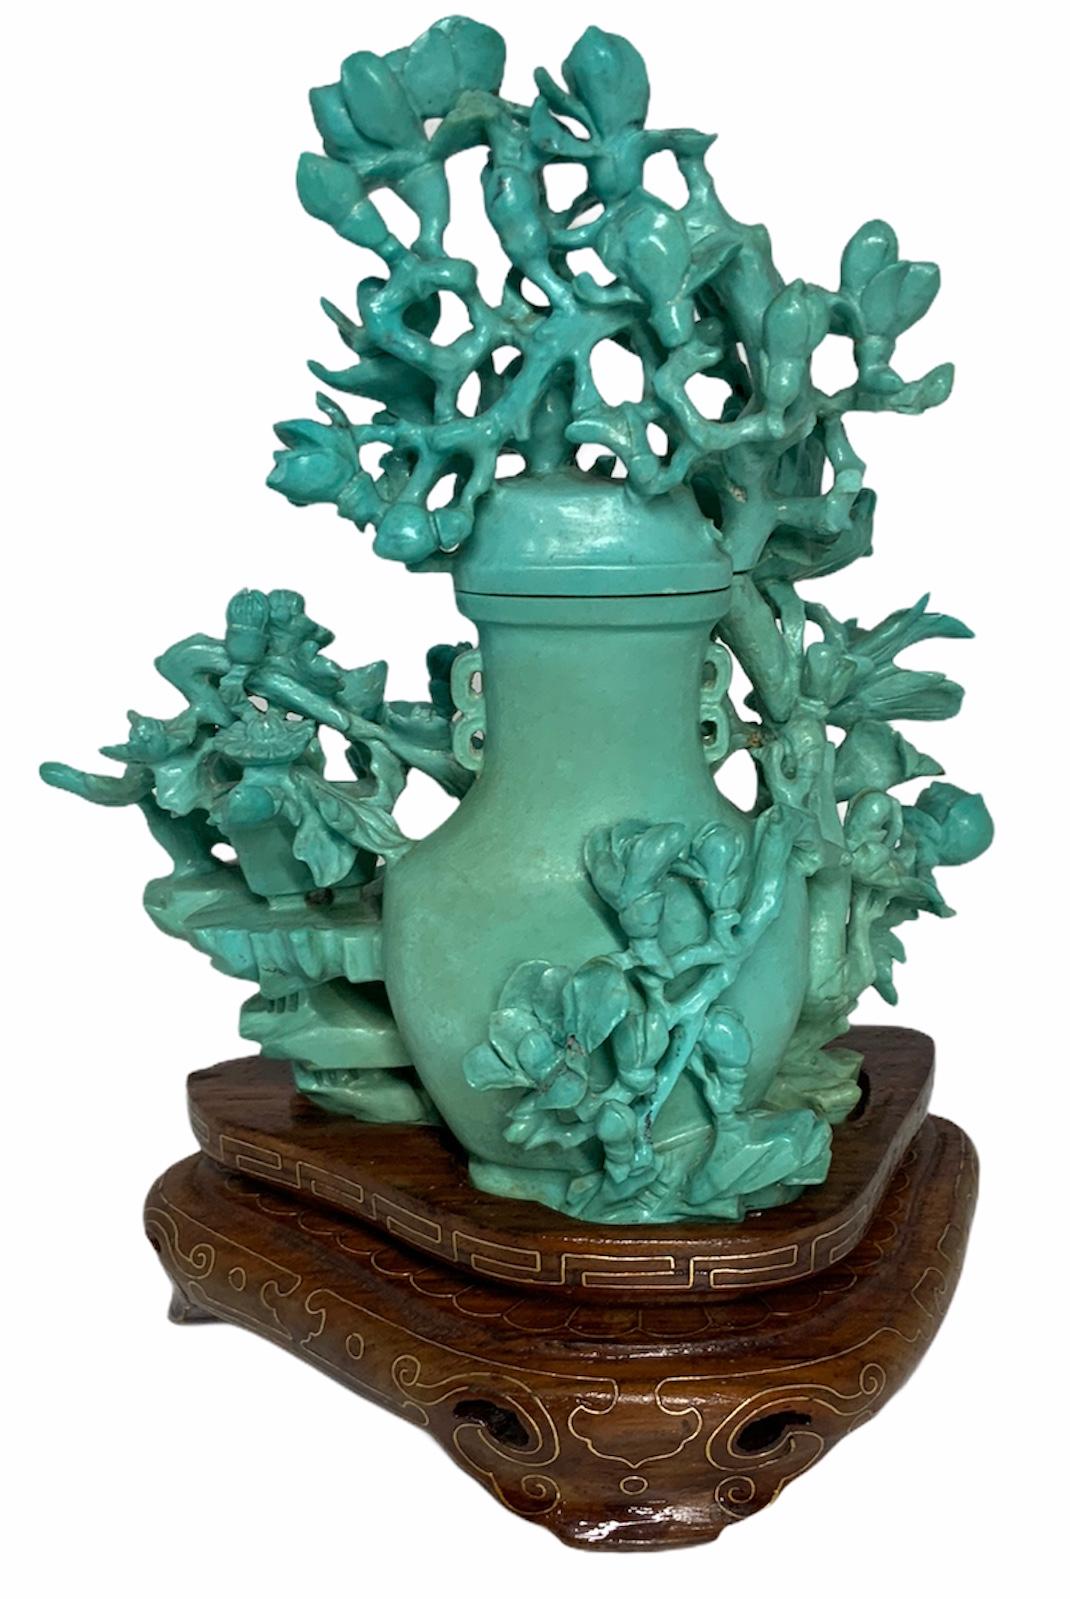 Mix of flowers arrange like a bonsai tree hiding a vase in the back. The scene is completed with two kittens, one that is playing with the branches and the other is observing it. The carving is this most likely Persian turquoise stone stands over a